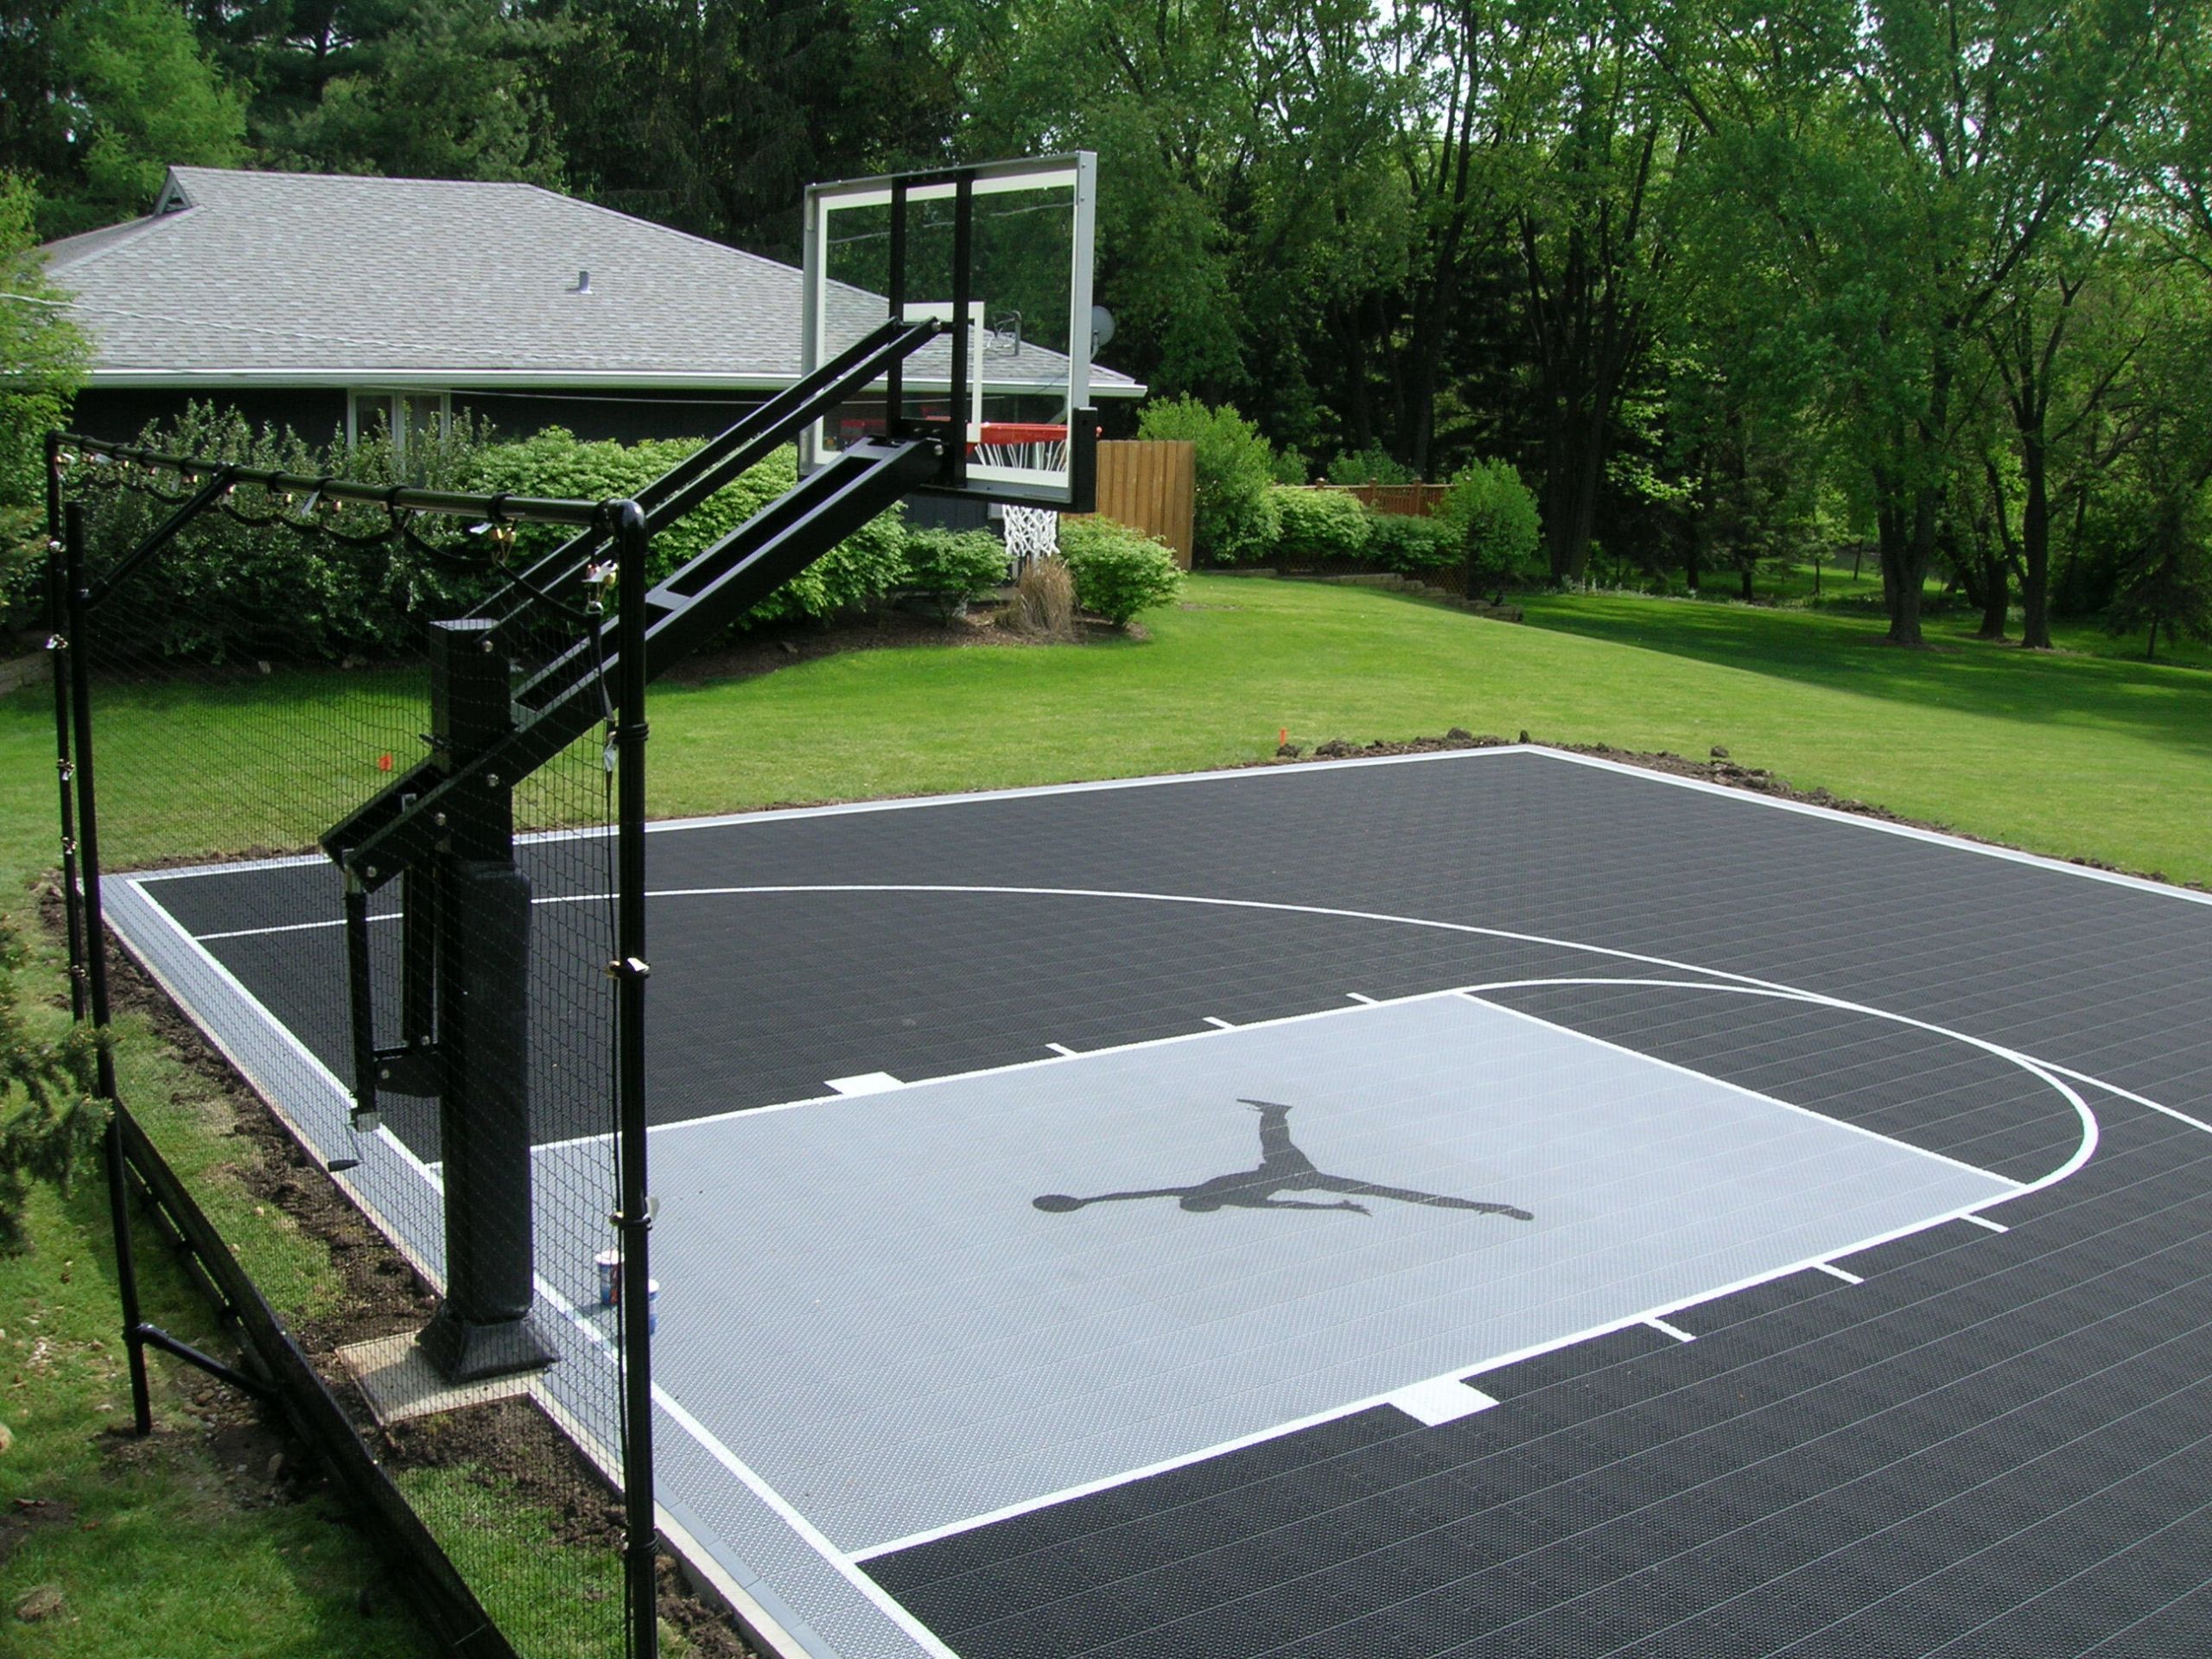 Basketball Court In Backyard Awesome Basketporn top 13 Backyard Basketball Courts Basketporn